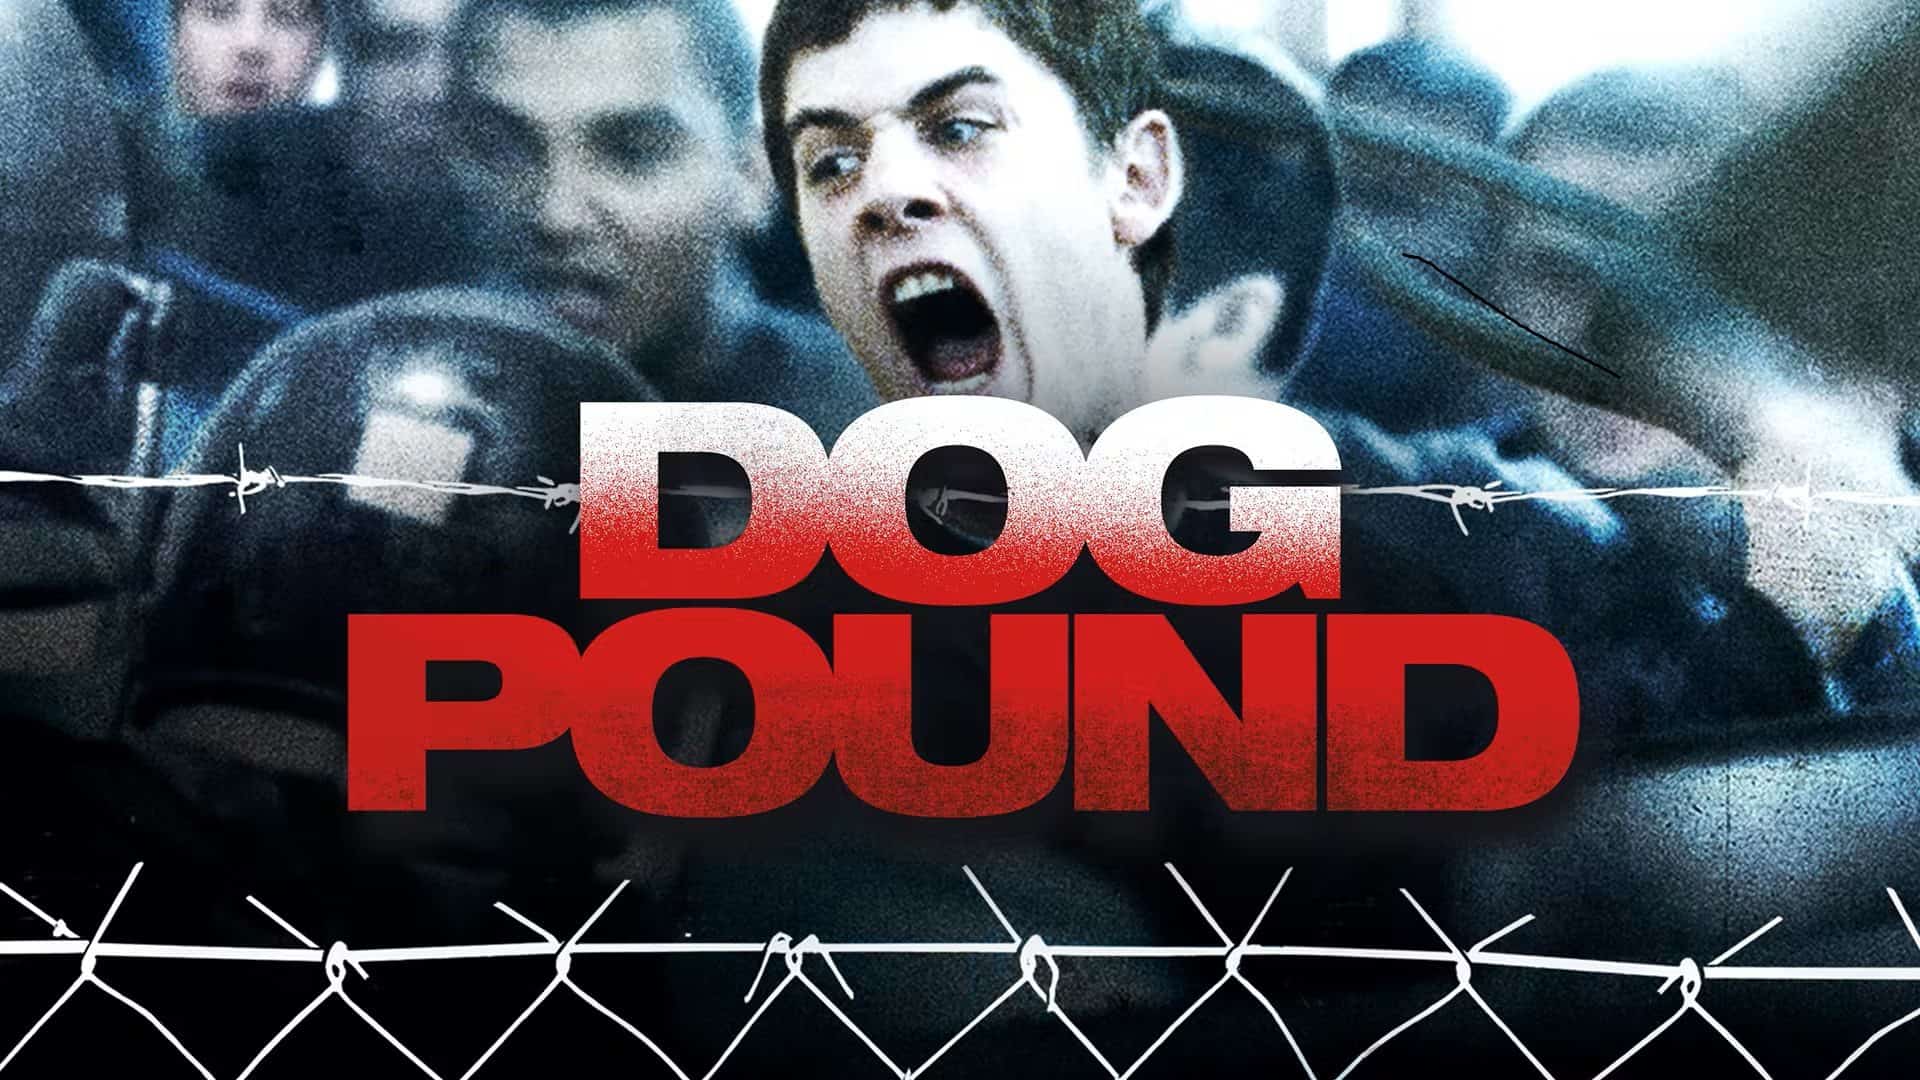 Dog pound ending explained; credits: Topic